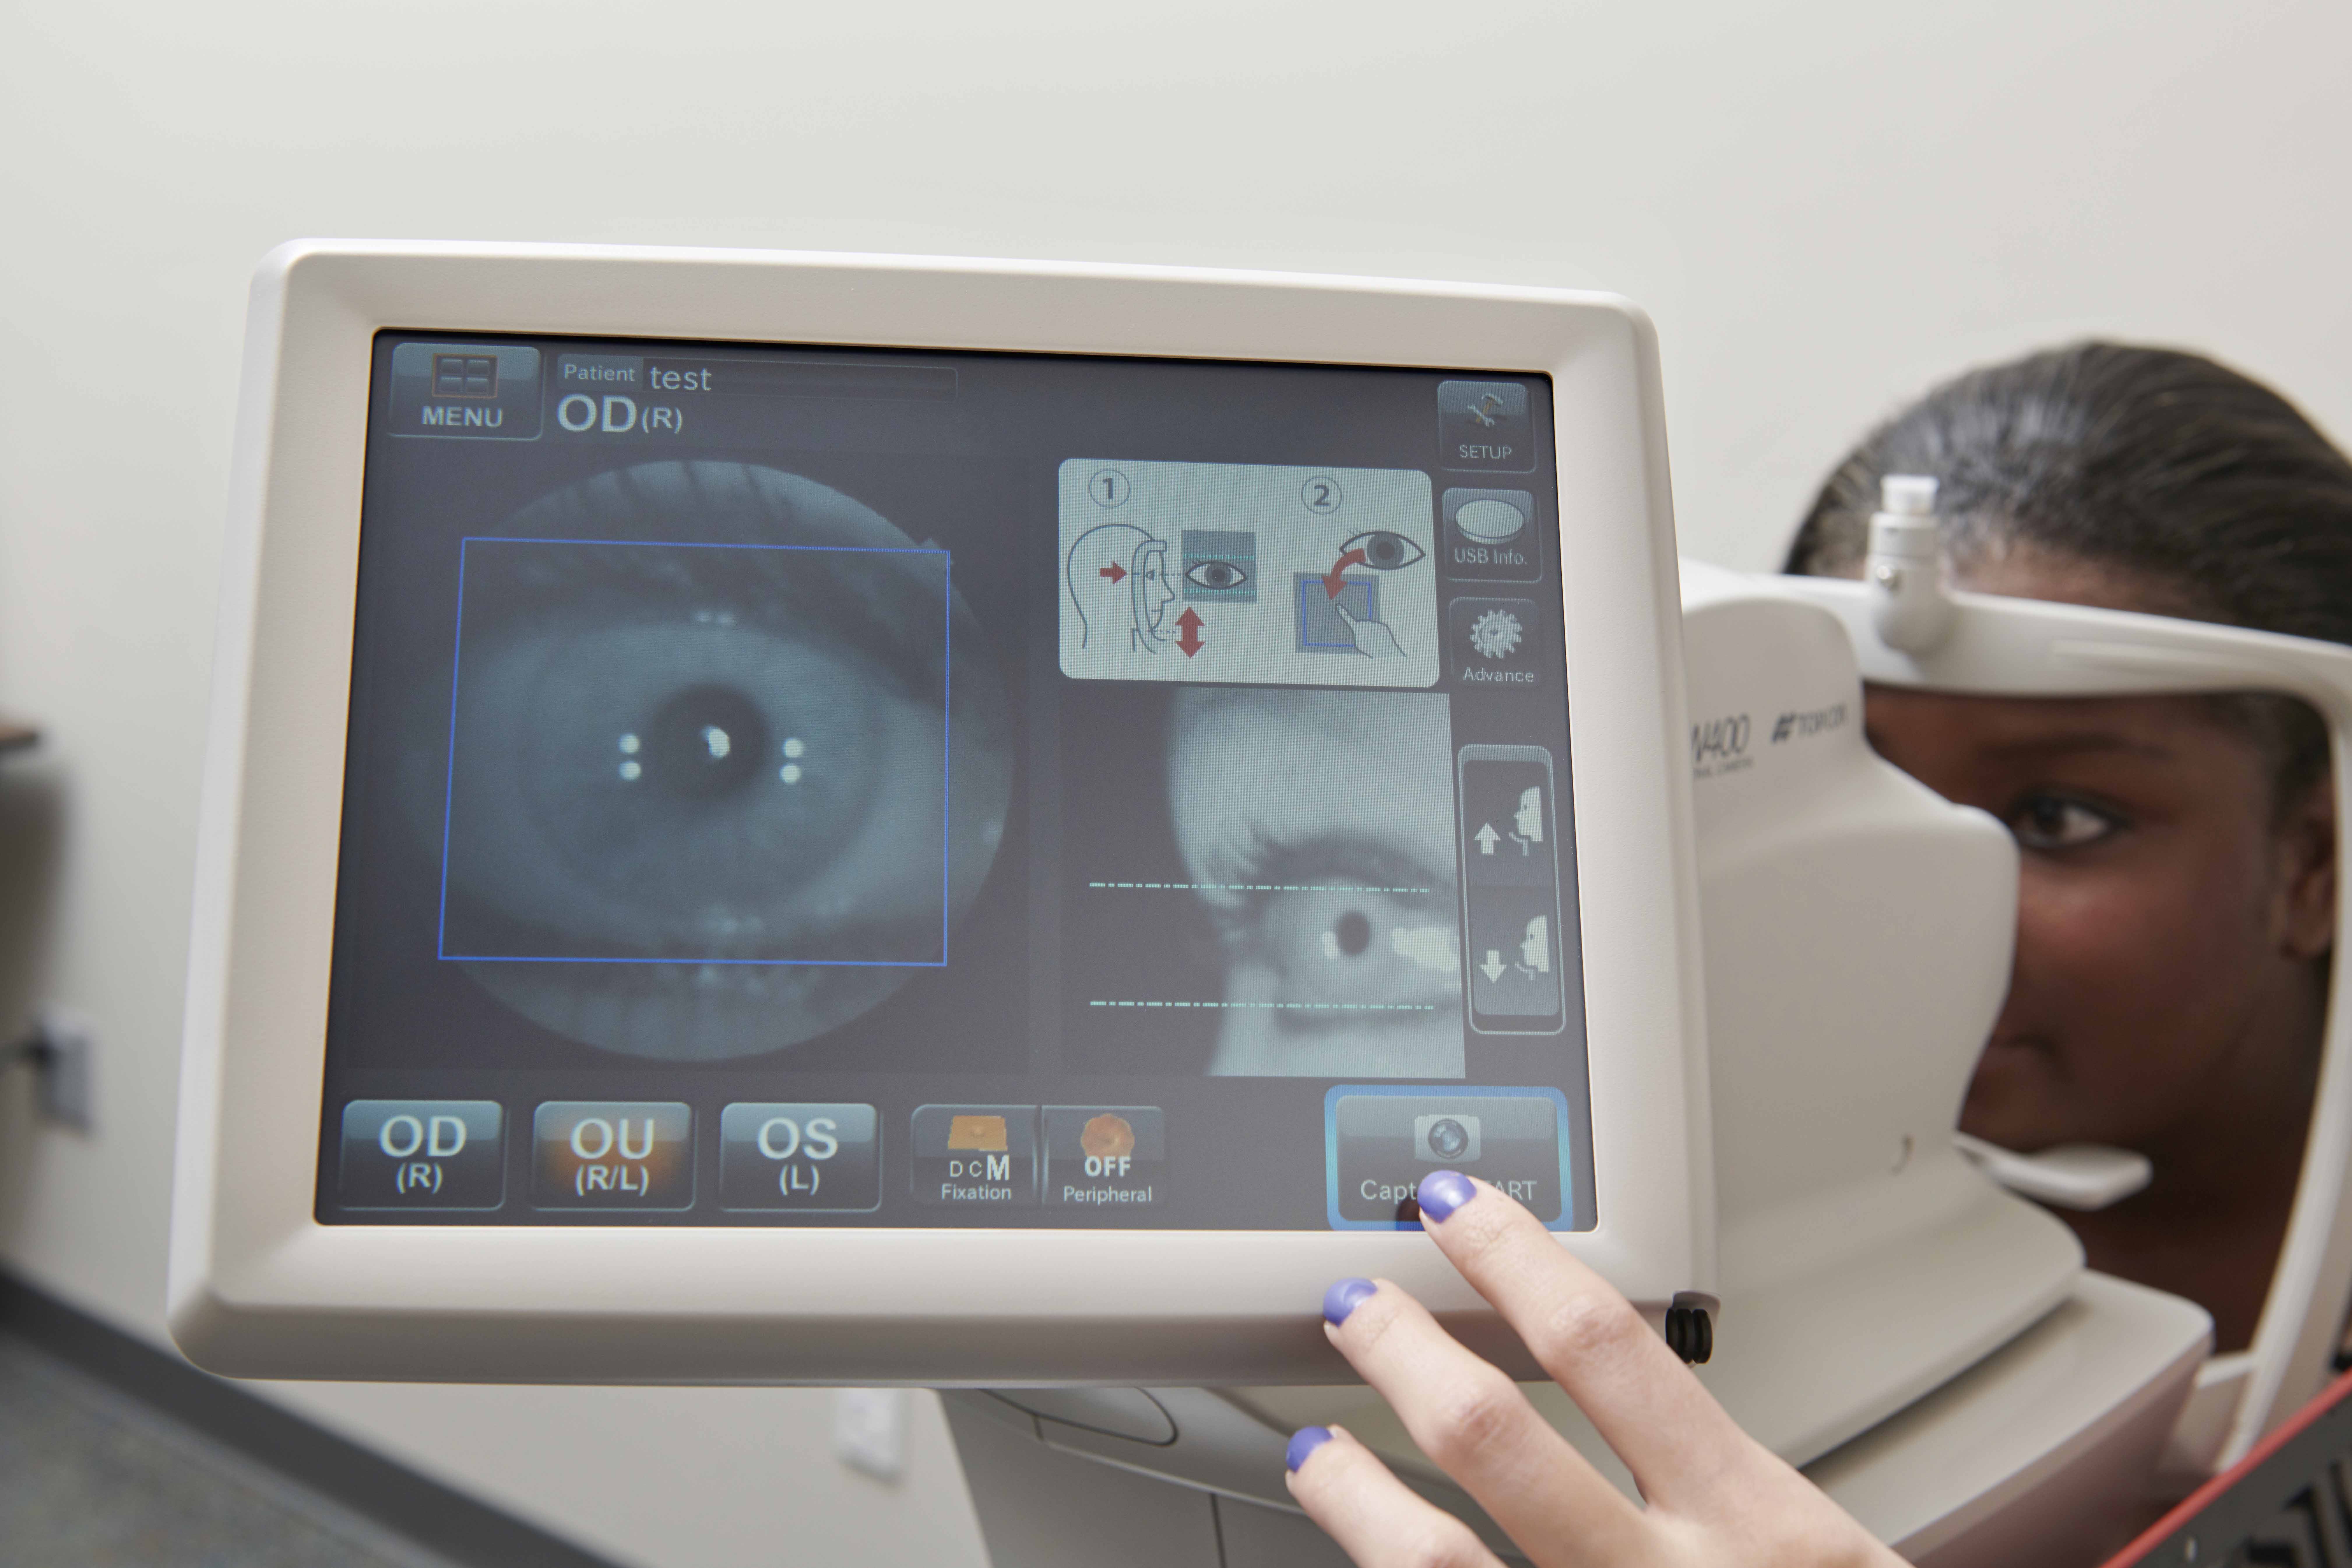 A patient is imaged with the IDx-DR system